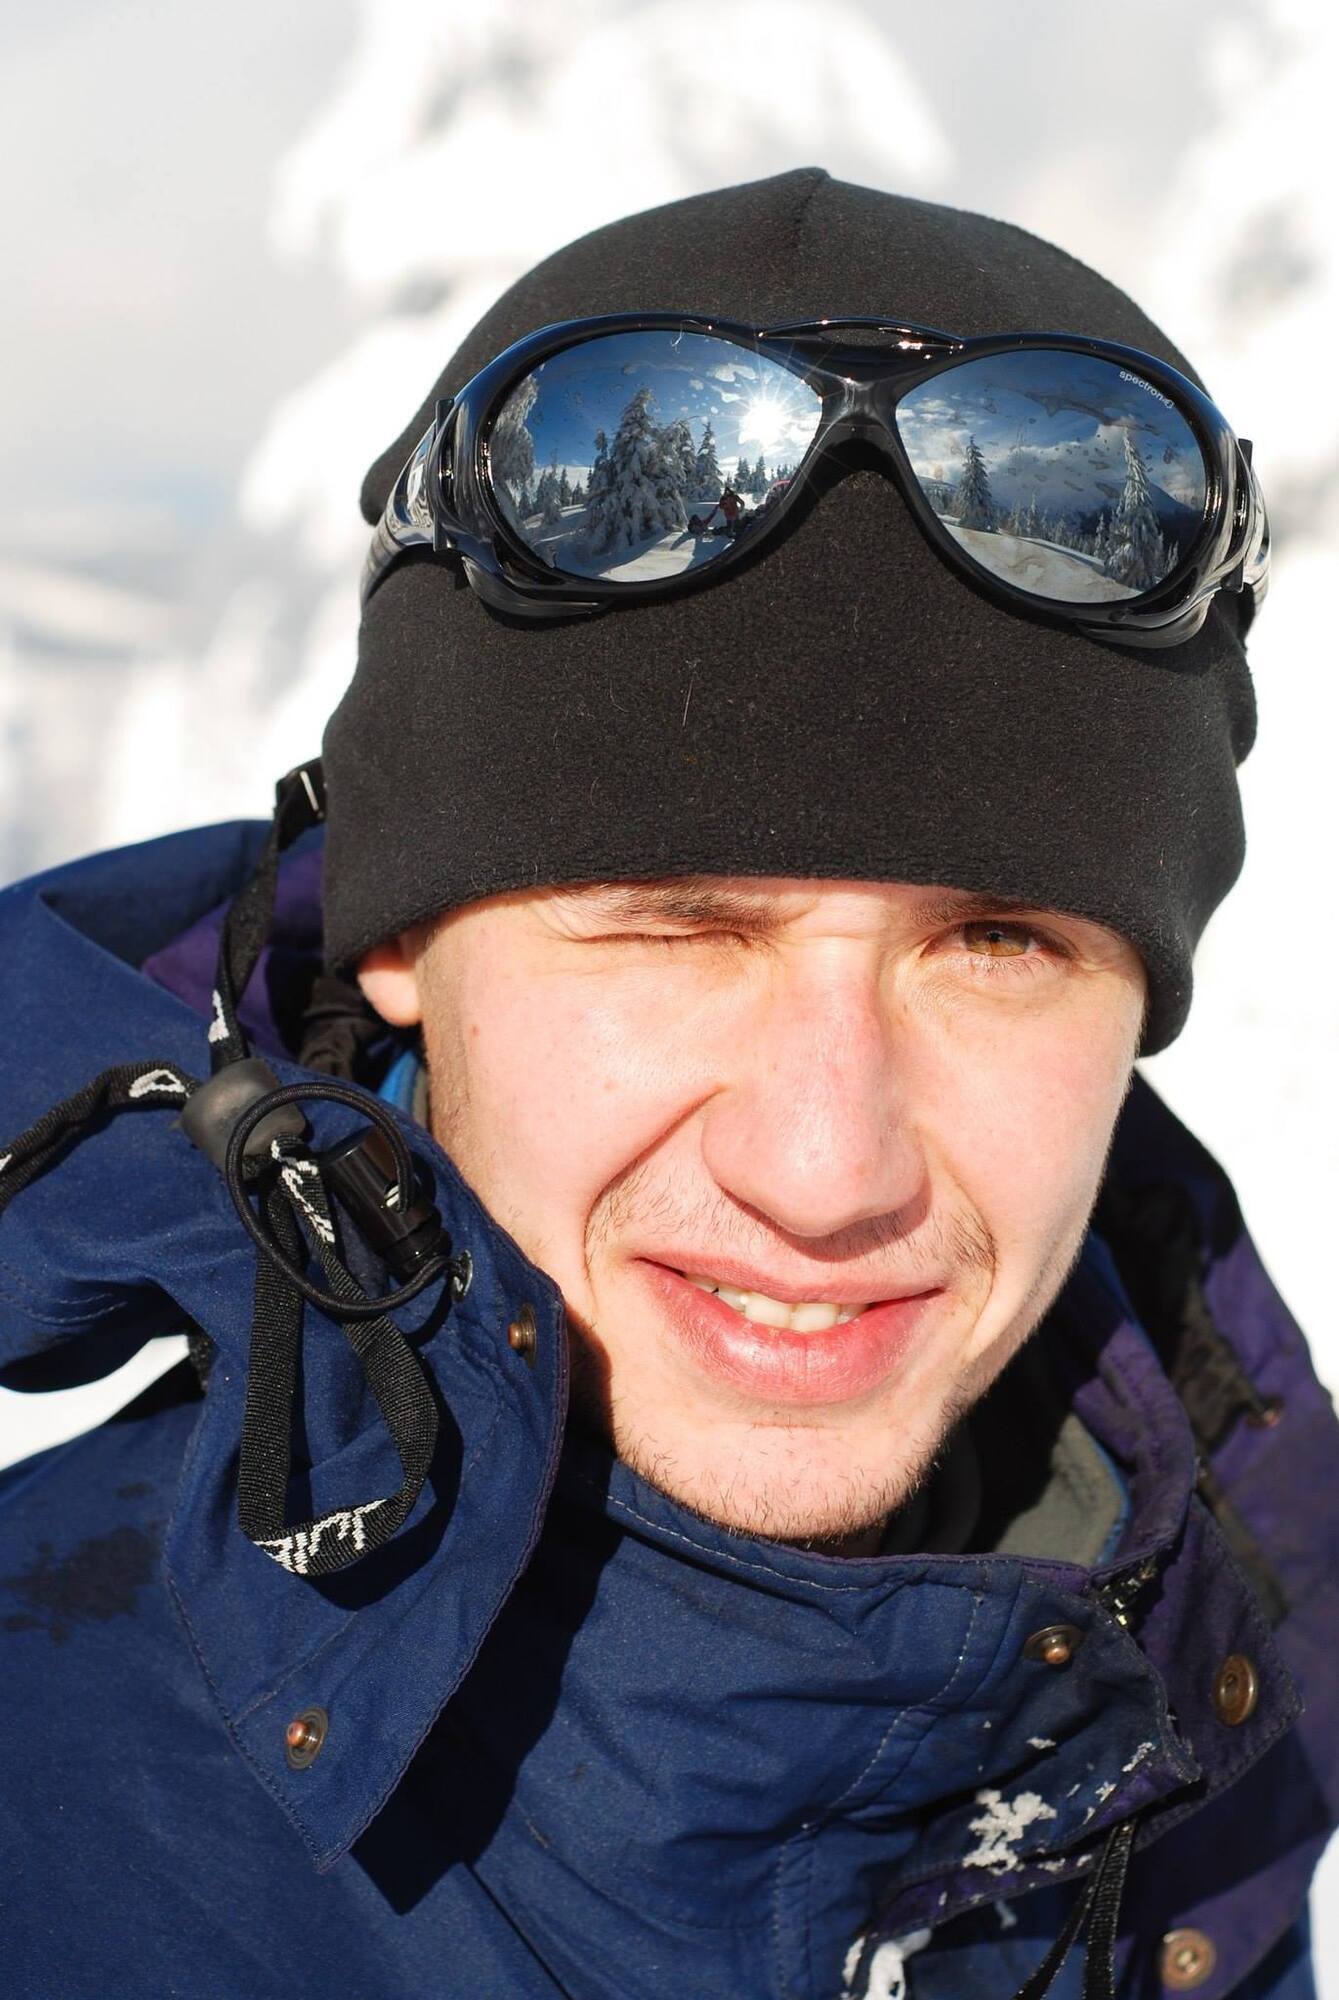 ''Had the character to go and climb untill the end'': Ukrainian climber, who fought against Russia, died on New Year's Eve